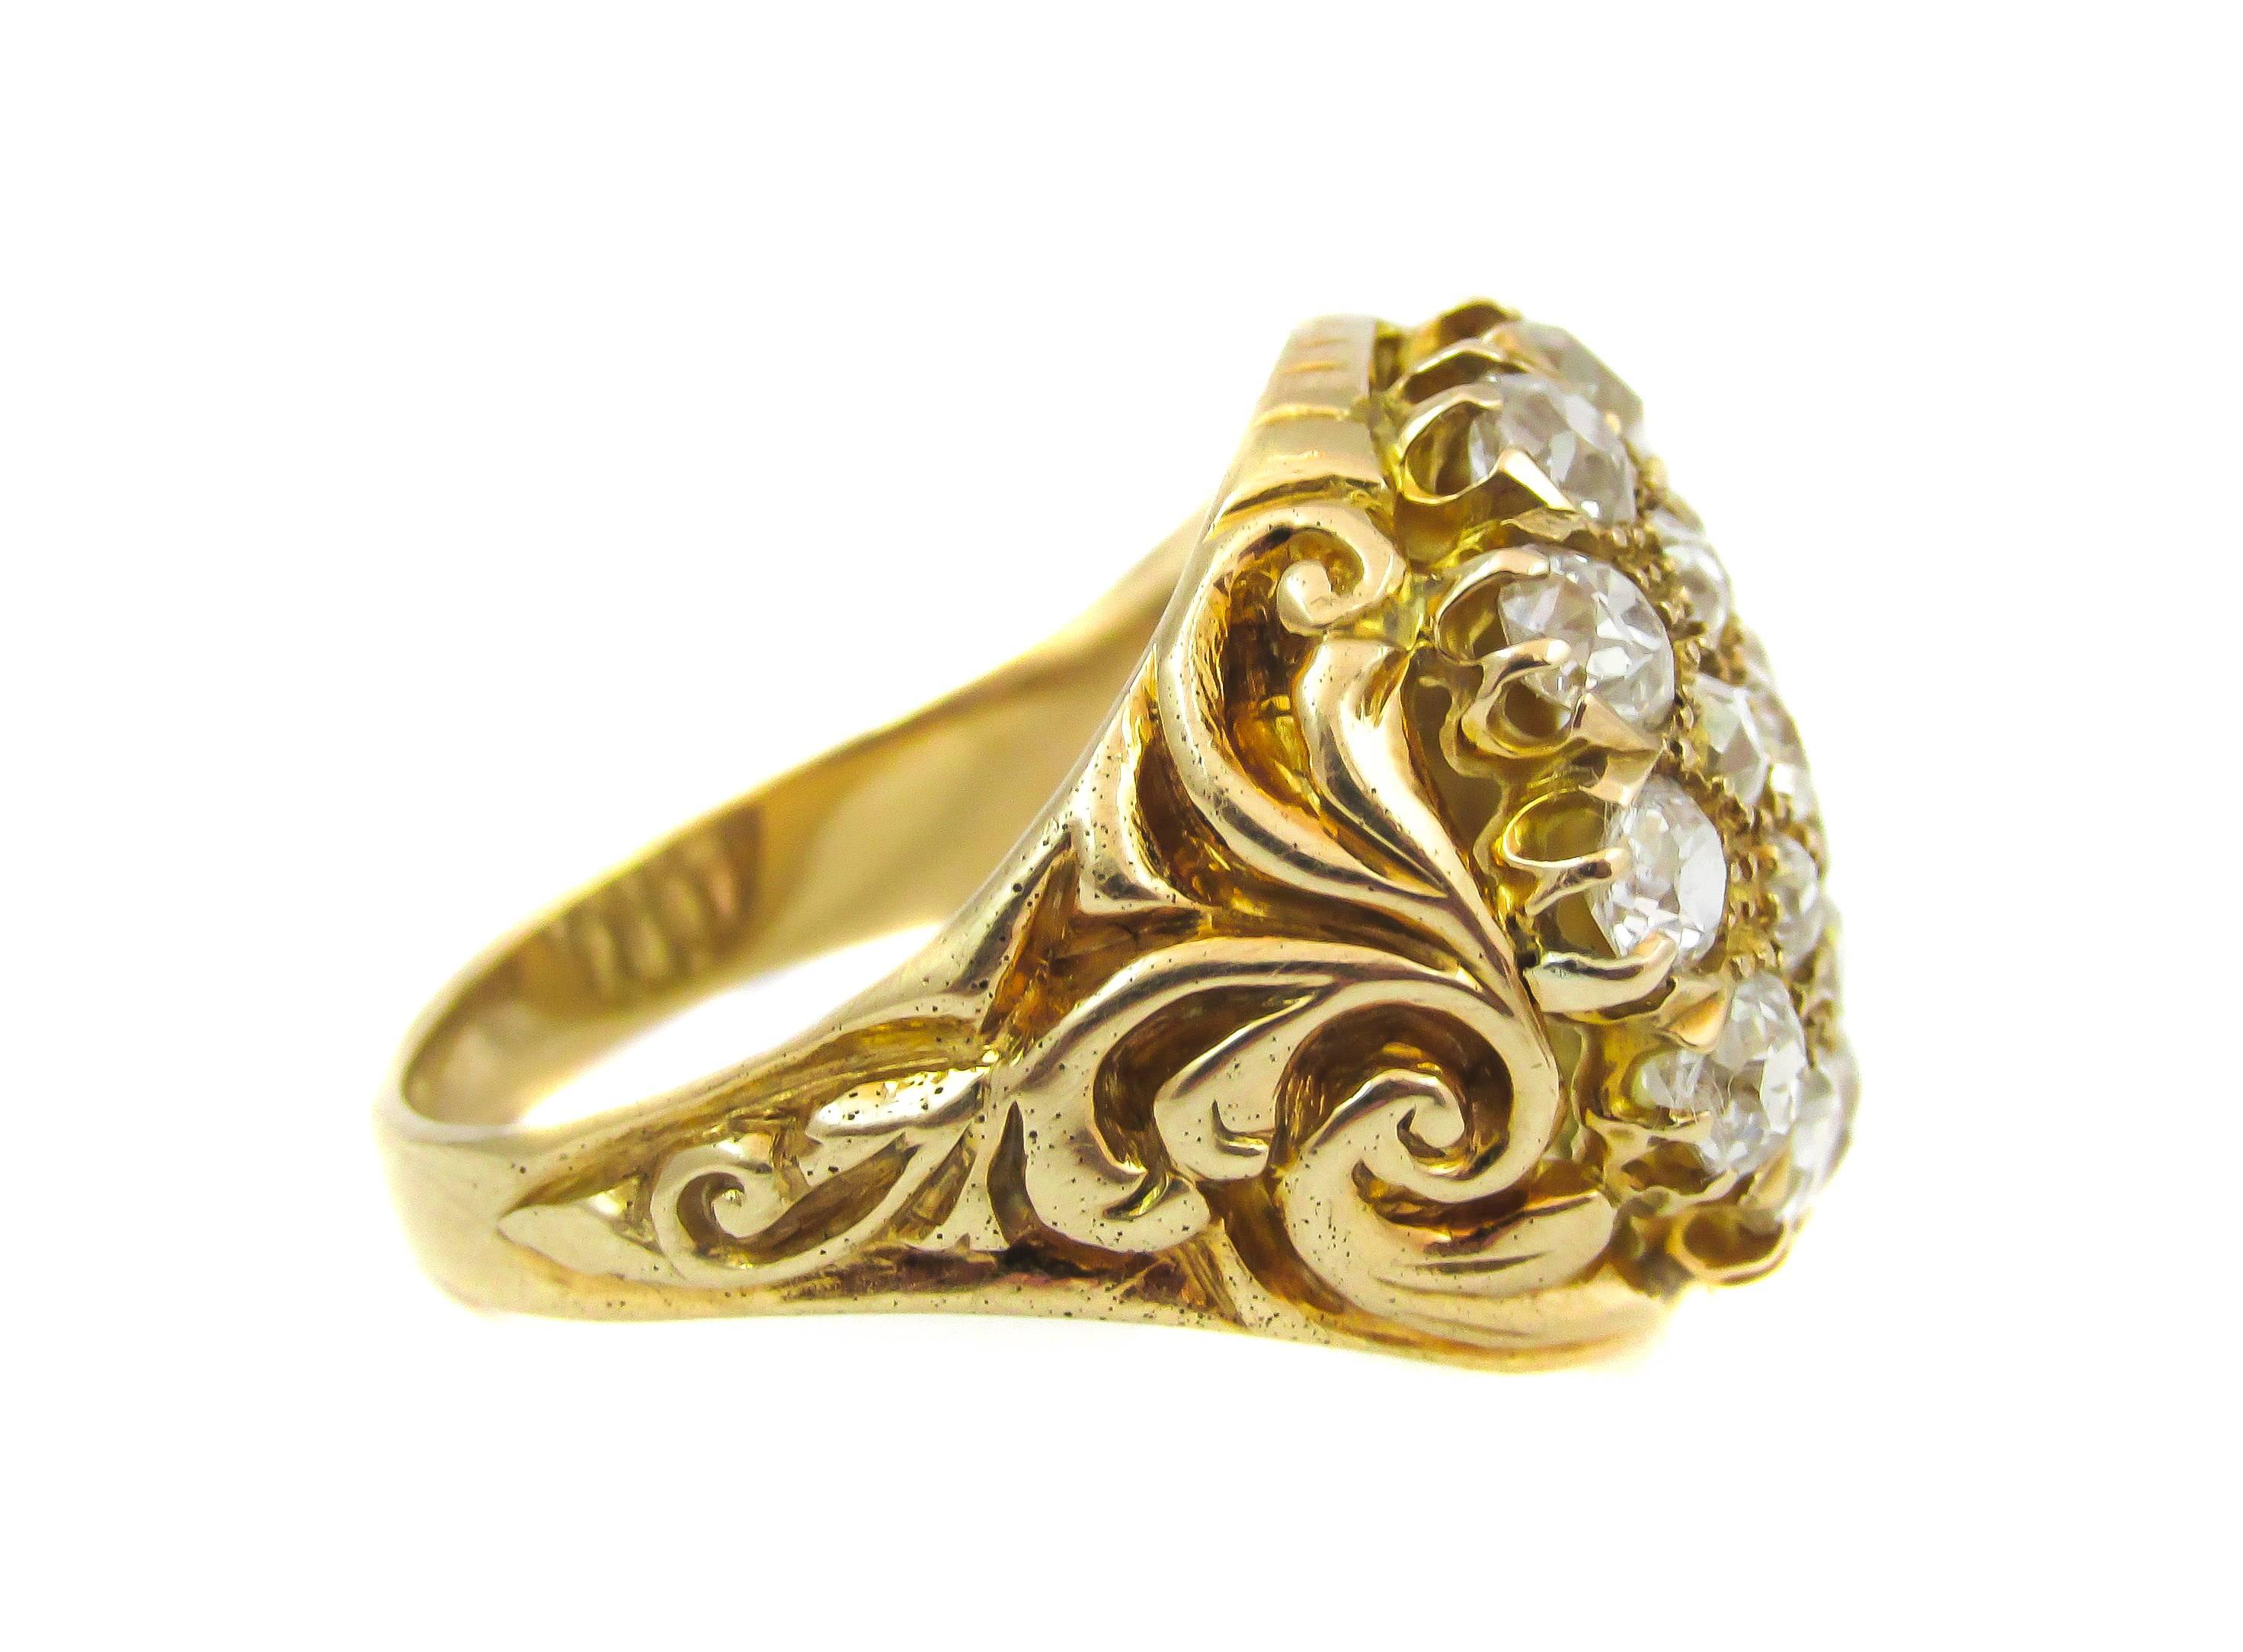 Stunning 18 karat gold old cut diamond princess ring pave set with 19 round cut diamonds weighing approximately 3 carats total. This finely handcrafted ring displays the wonderful craftsmanship and designs from the Victorian era. The ring's fine